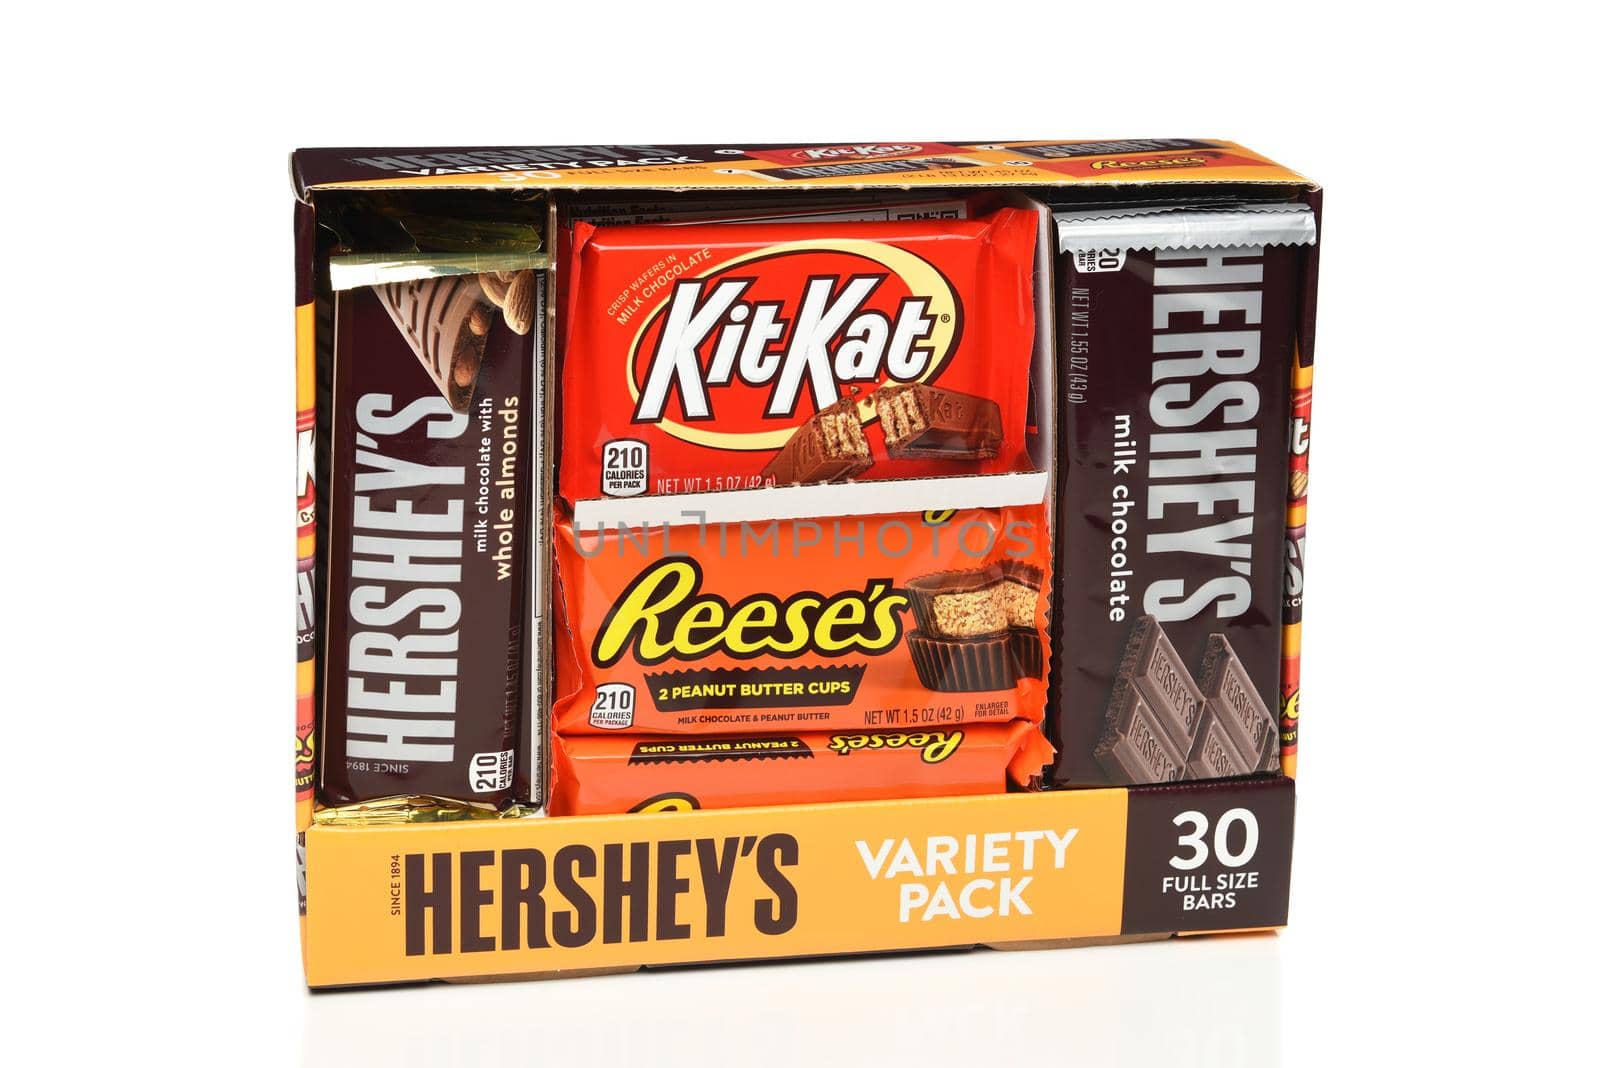 IRVINE, CALIFORNIA - 6 OCT 2020: A 30 count variery pack box of Hershey’s Candy Bars.